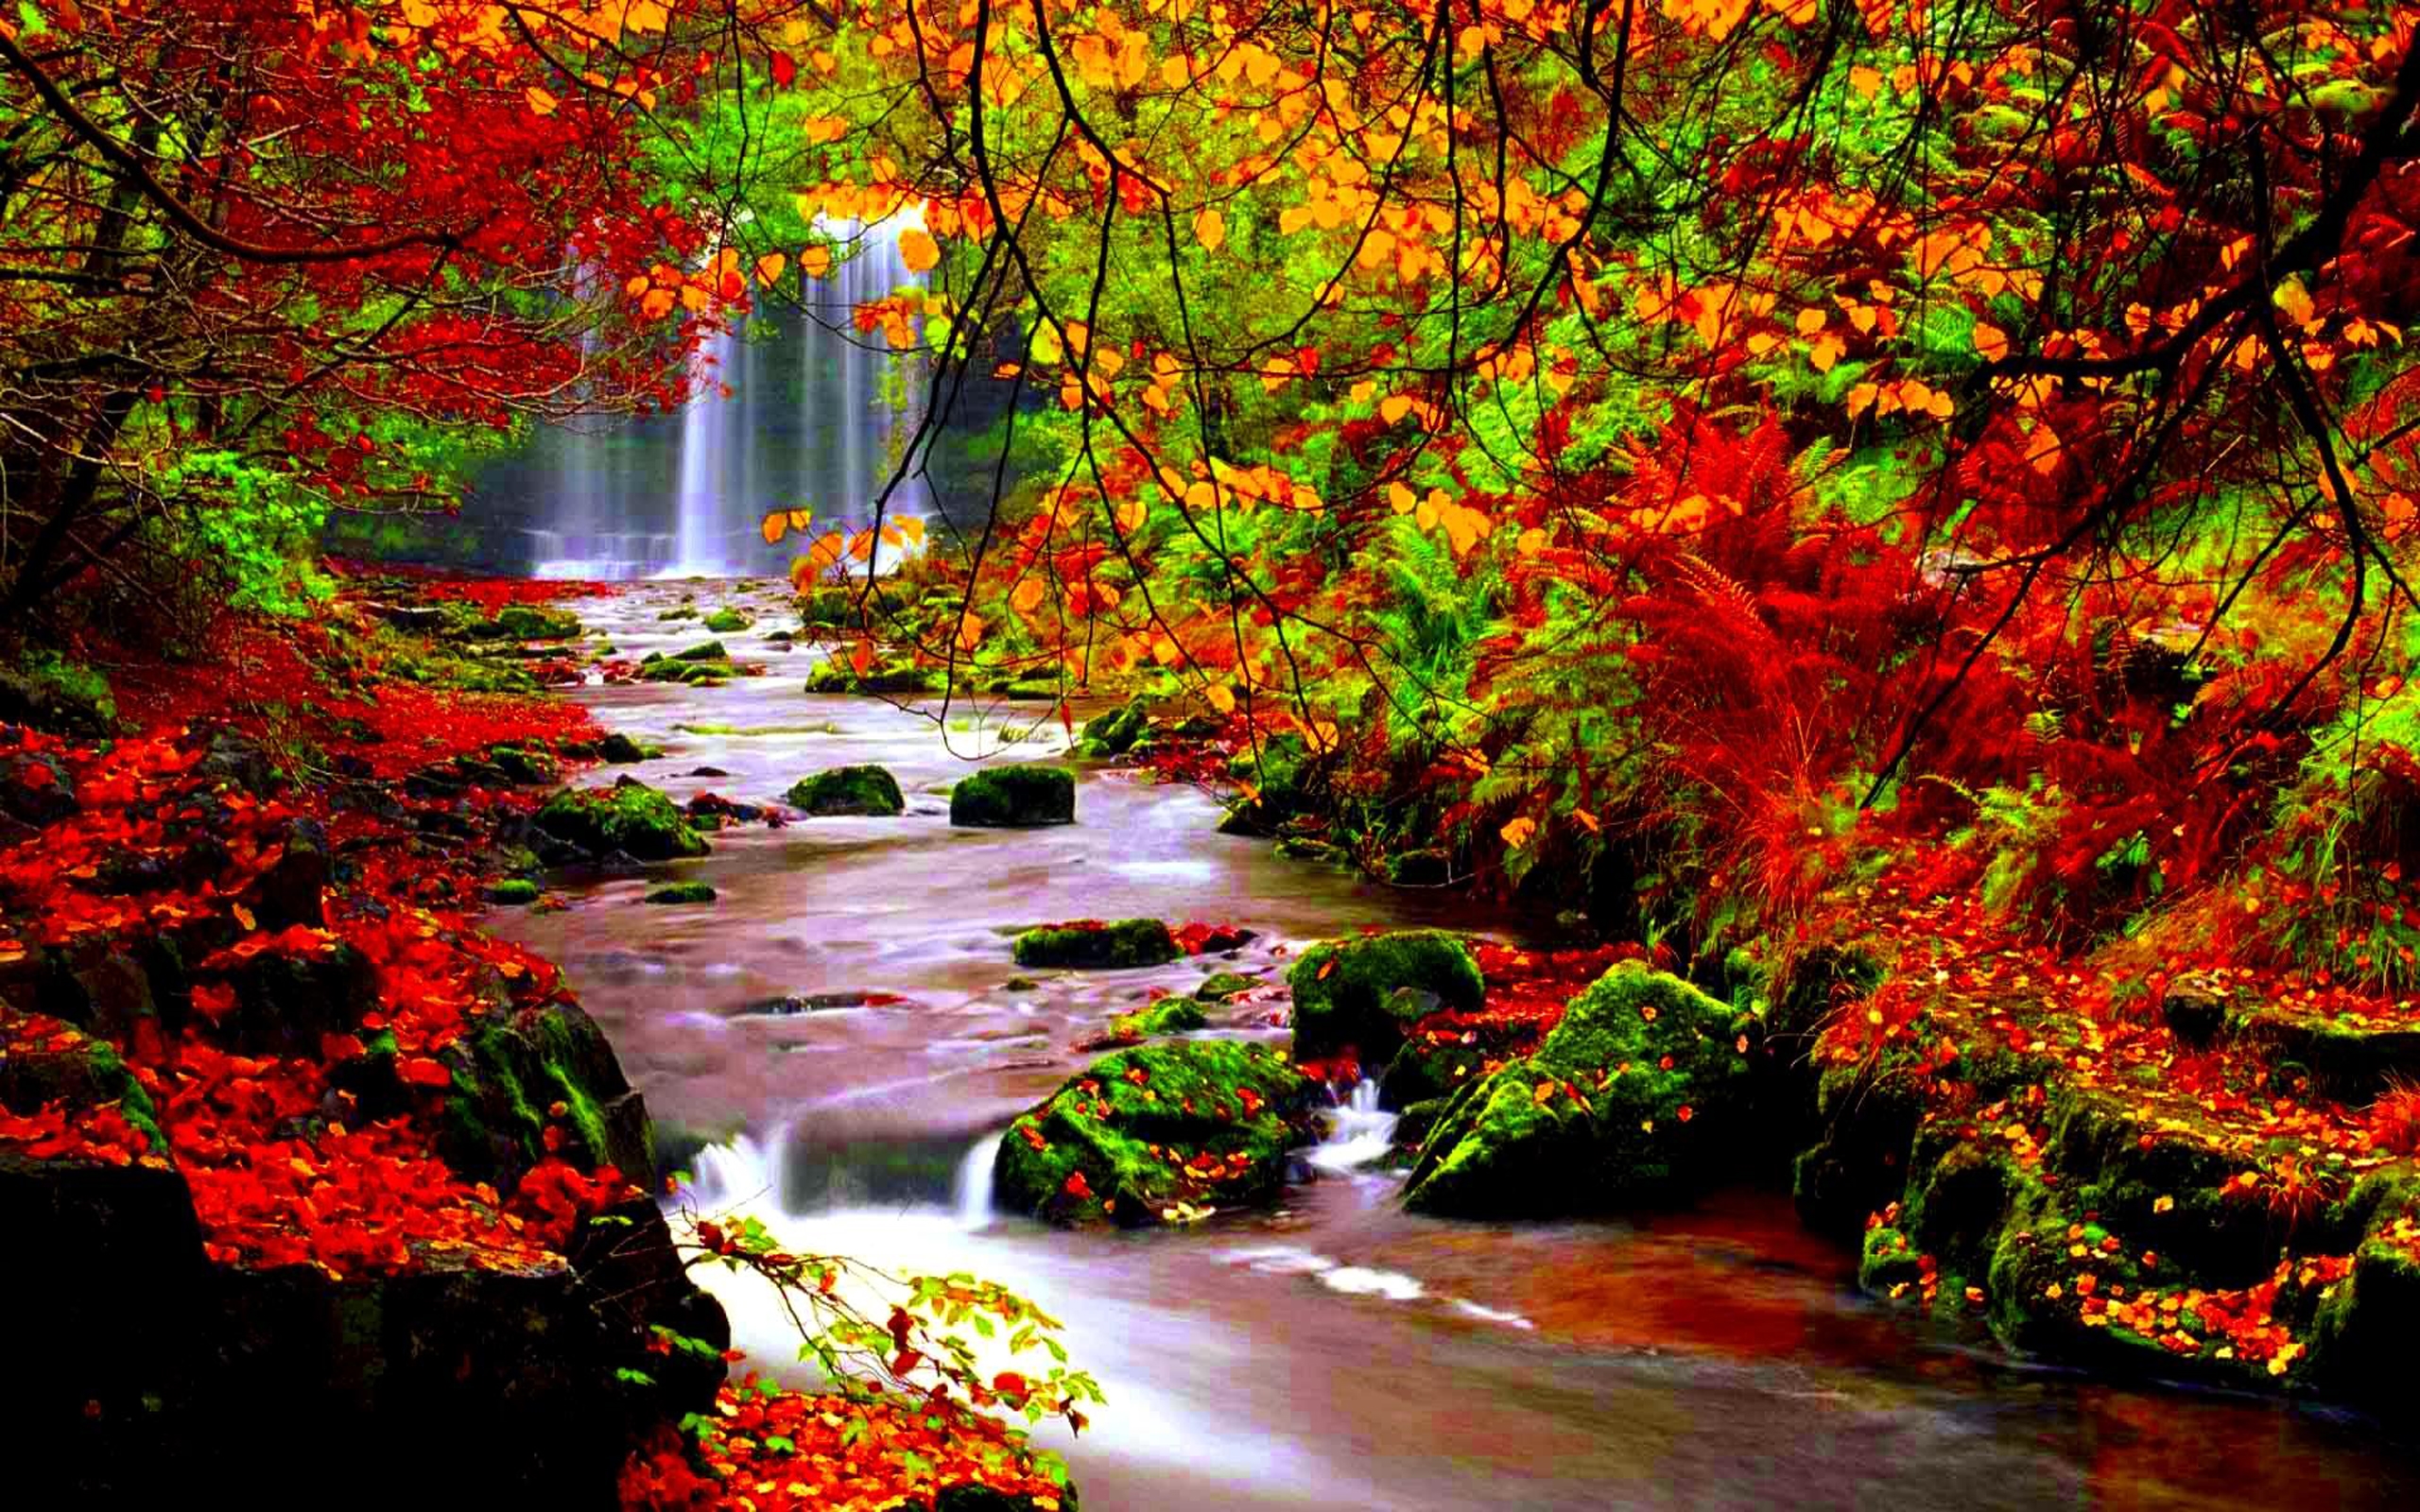 Autumn River Wallpaper Hd   Fall Leaves And Water Hd Wallpapers